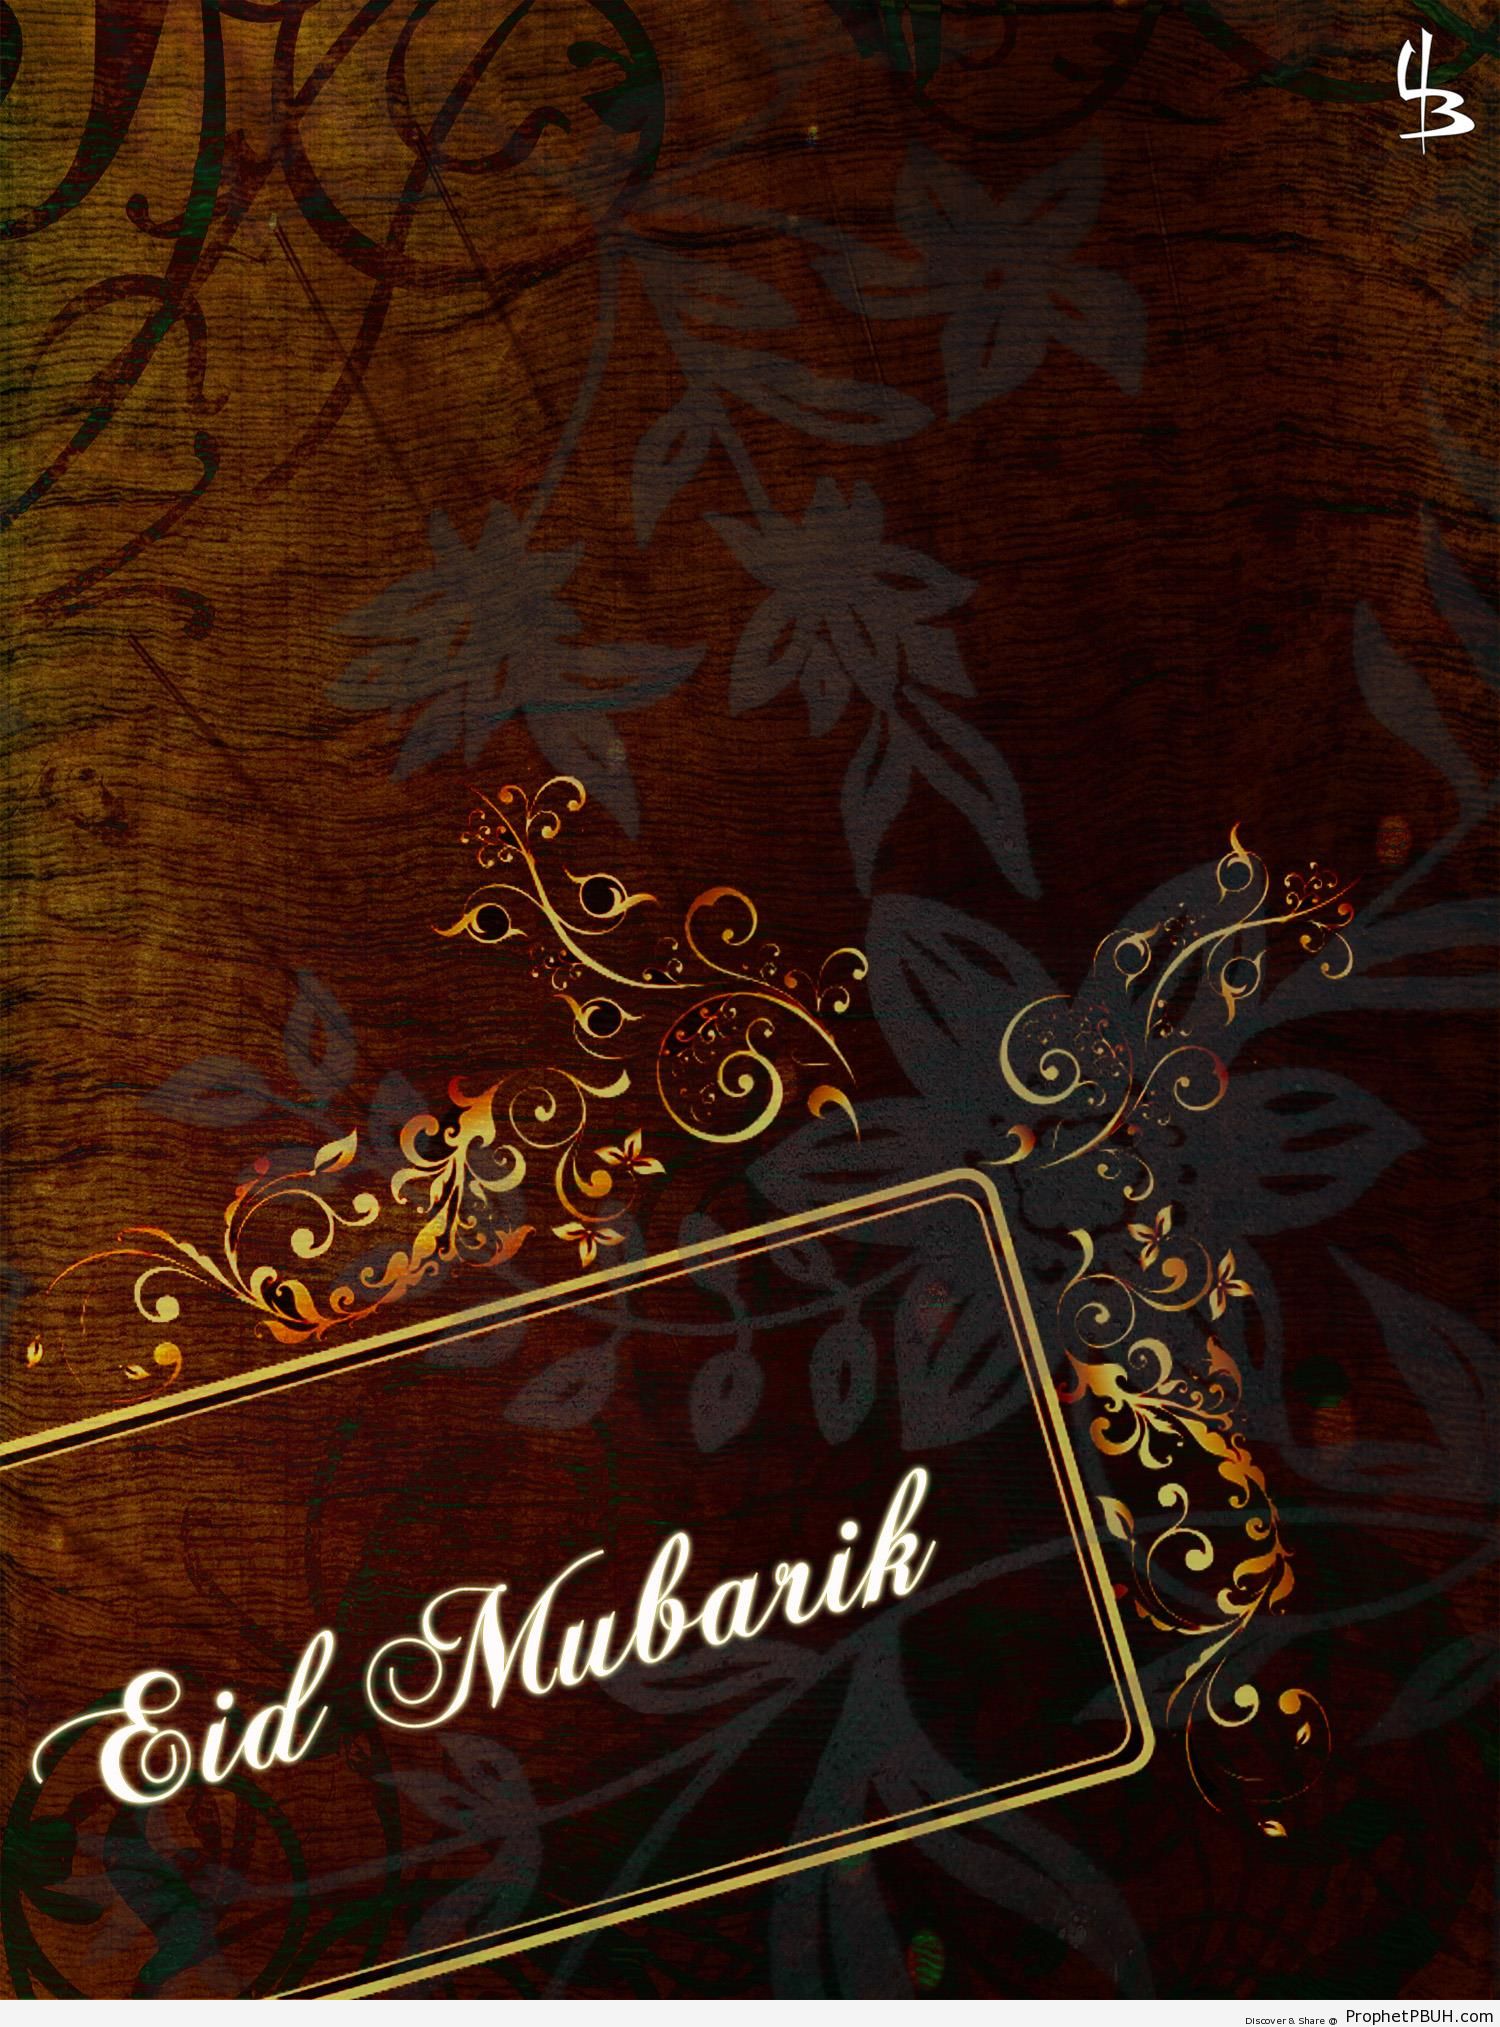 Eid Mubarak Greeting in Gold Frame with Simple Pretty Designs on Brown Backround - Eid Mubarak Greeting Cards, Graphics, and Wallpapers -